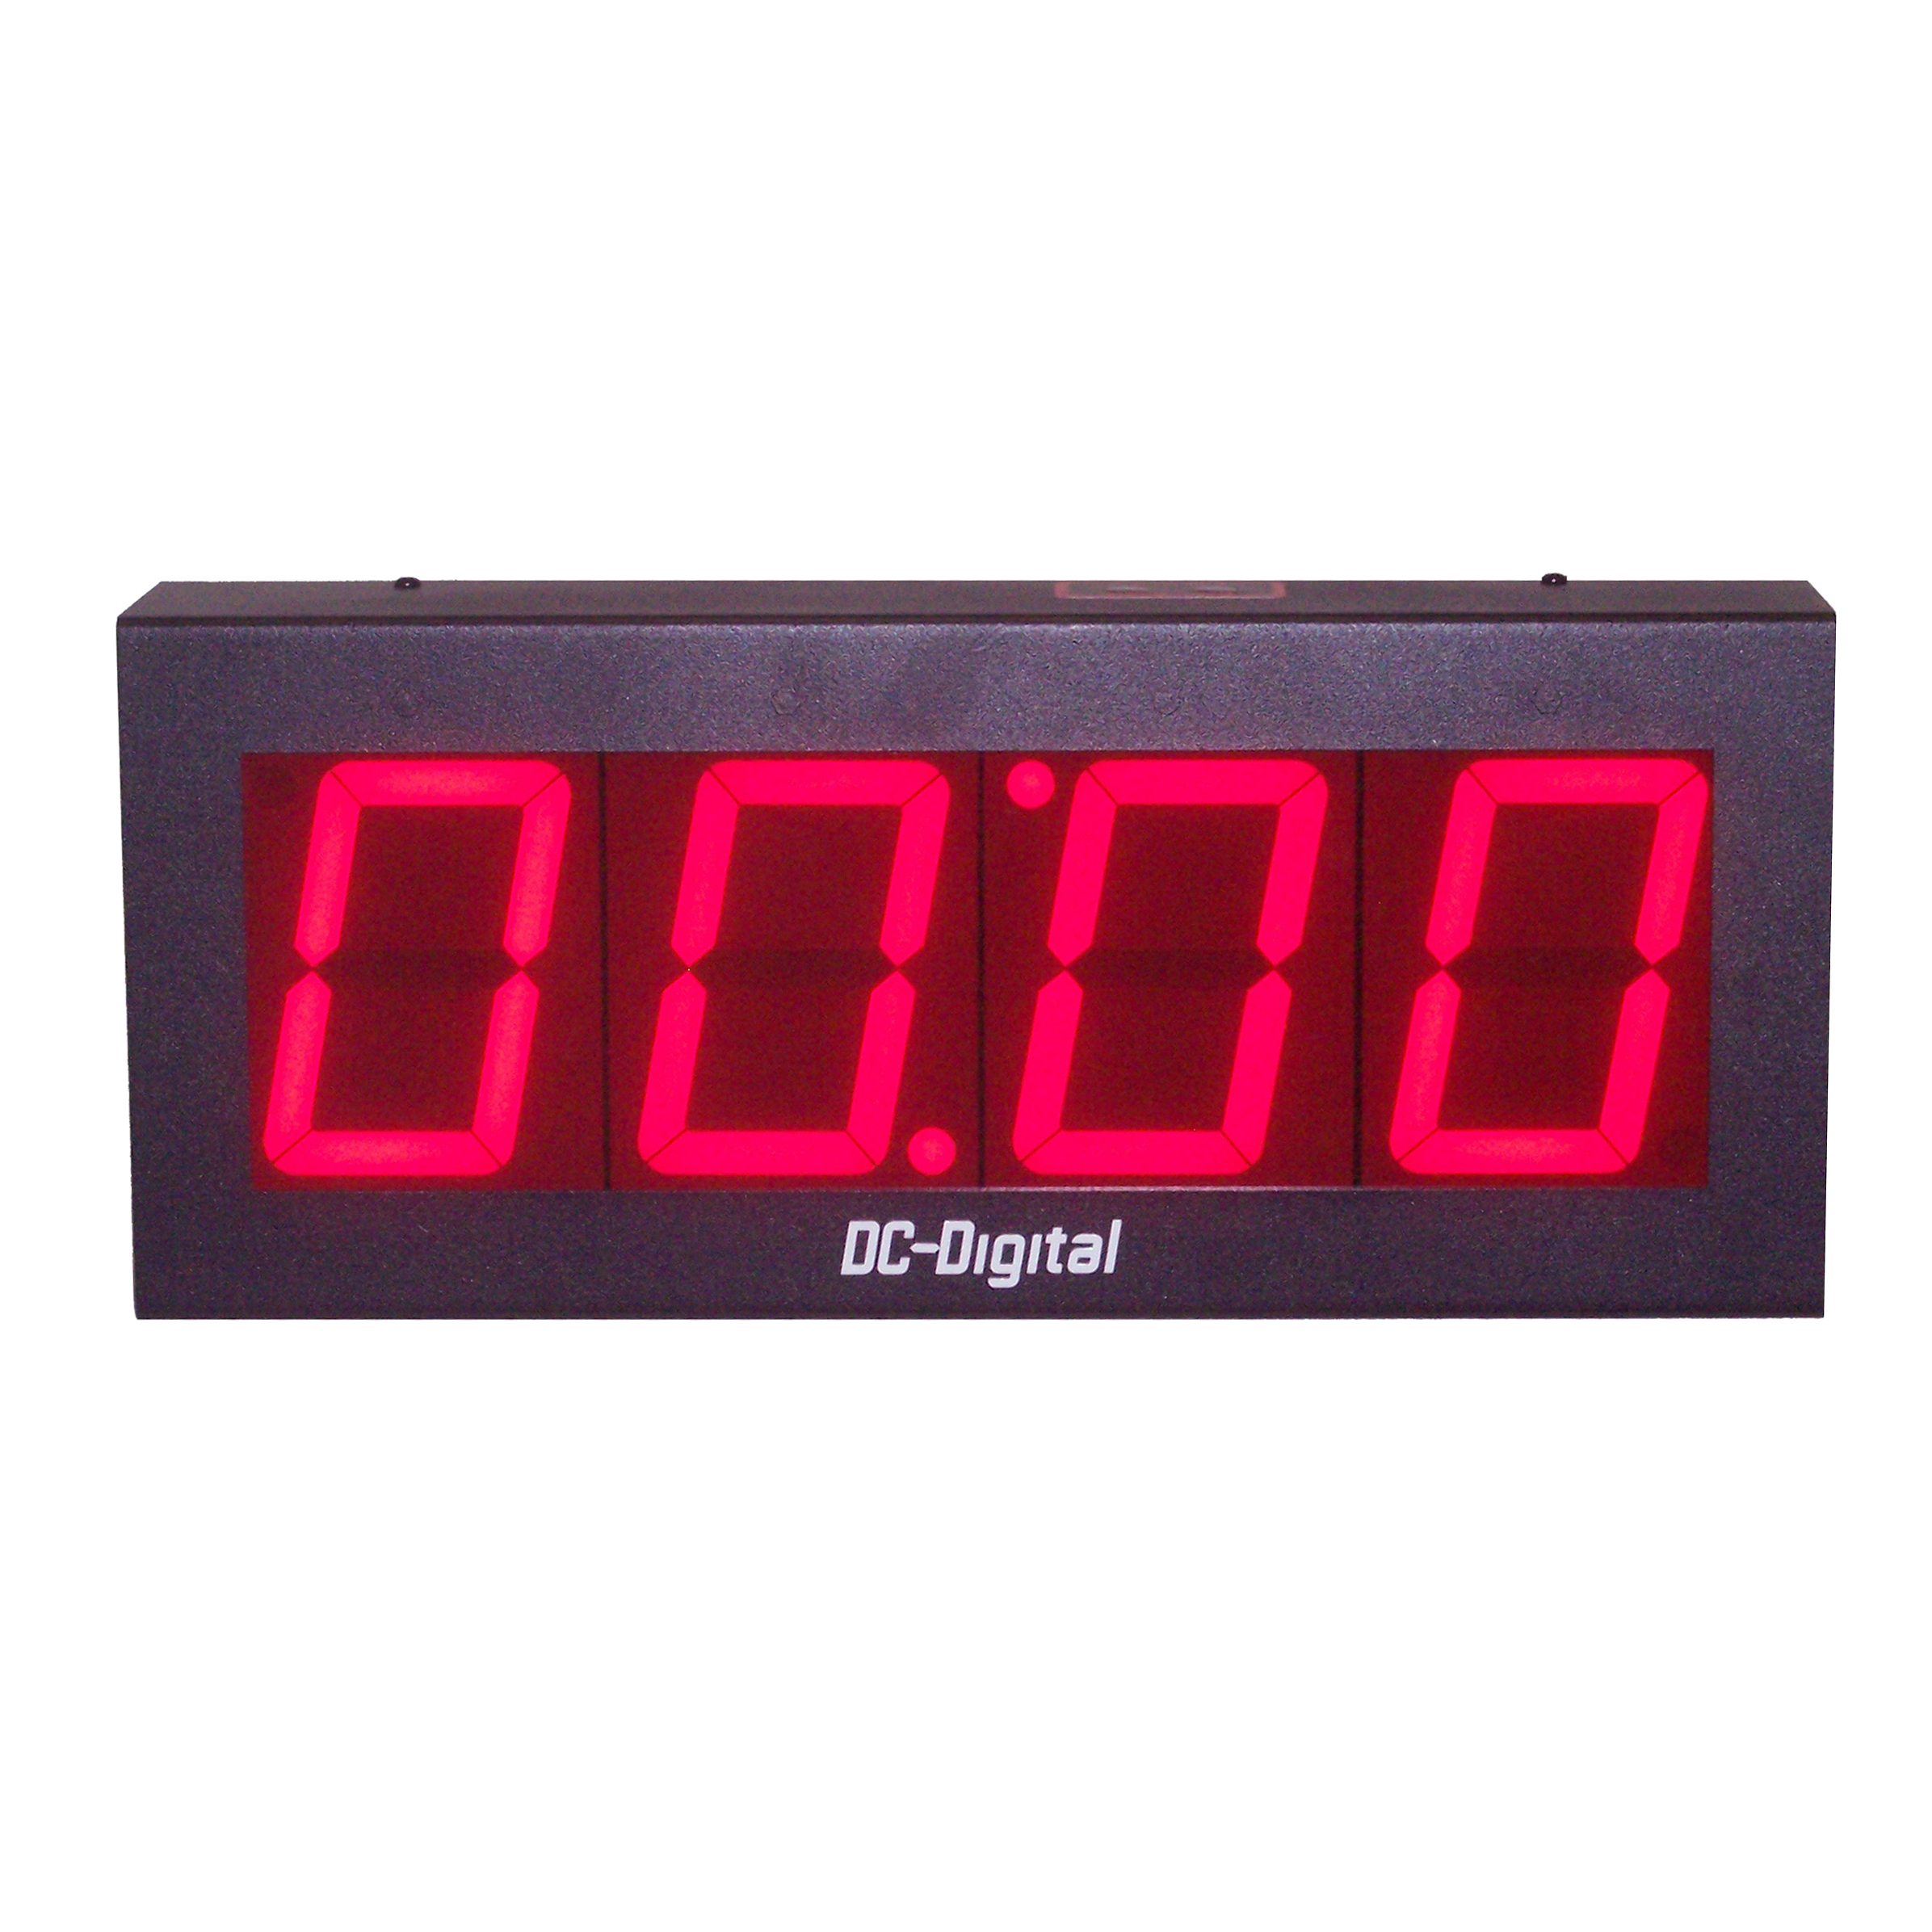 (DC-40T-UP) 4.0 Inch LED Digital, Push-Button Controlled, Count Up Timer, Shift Digit Technology